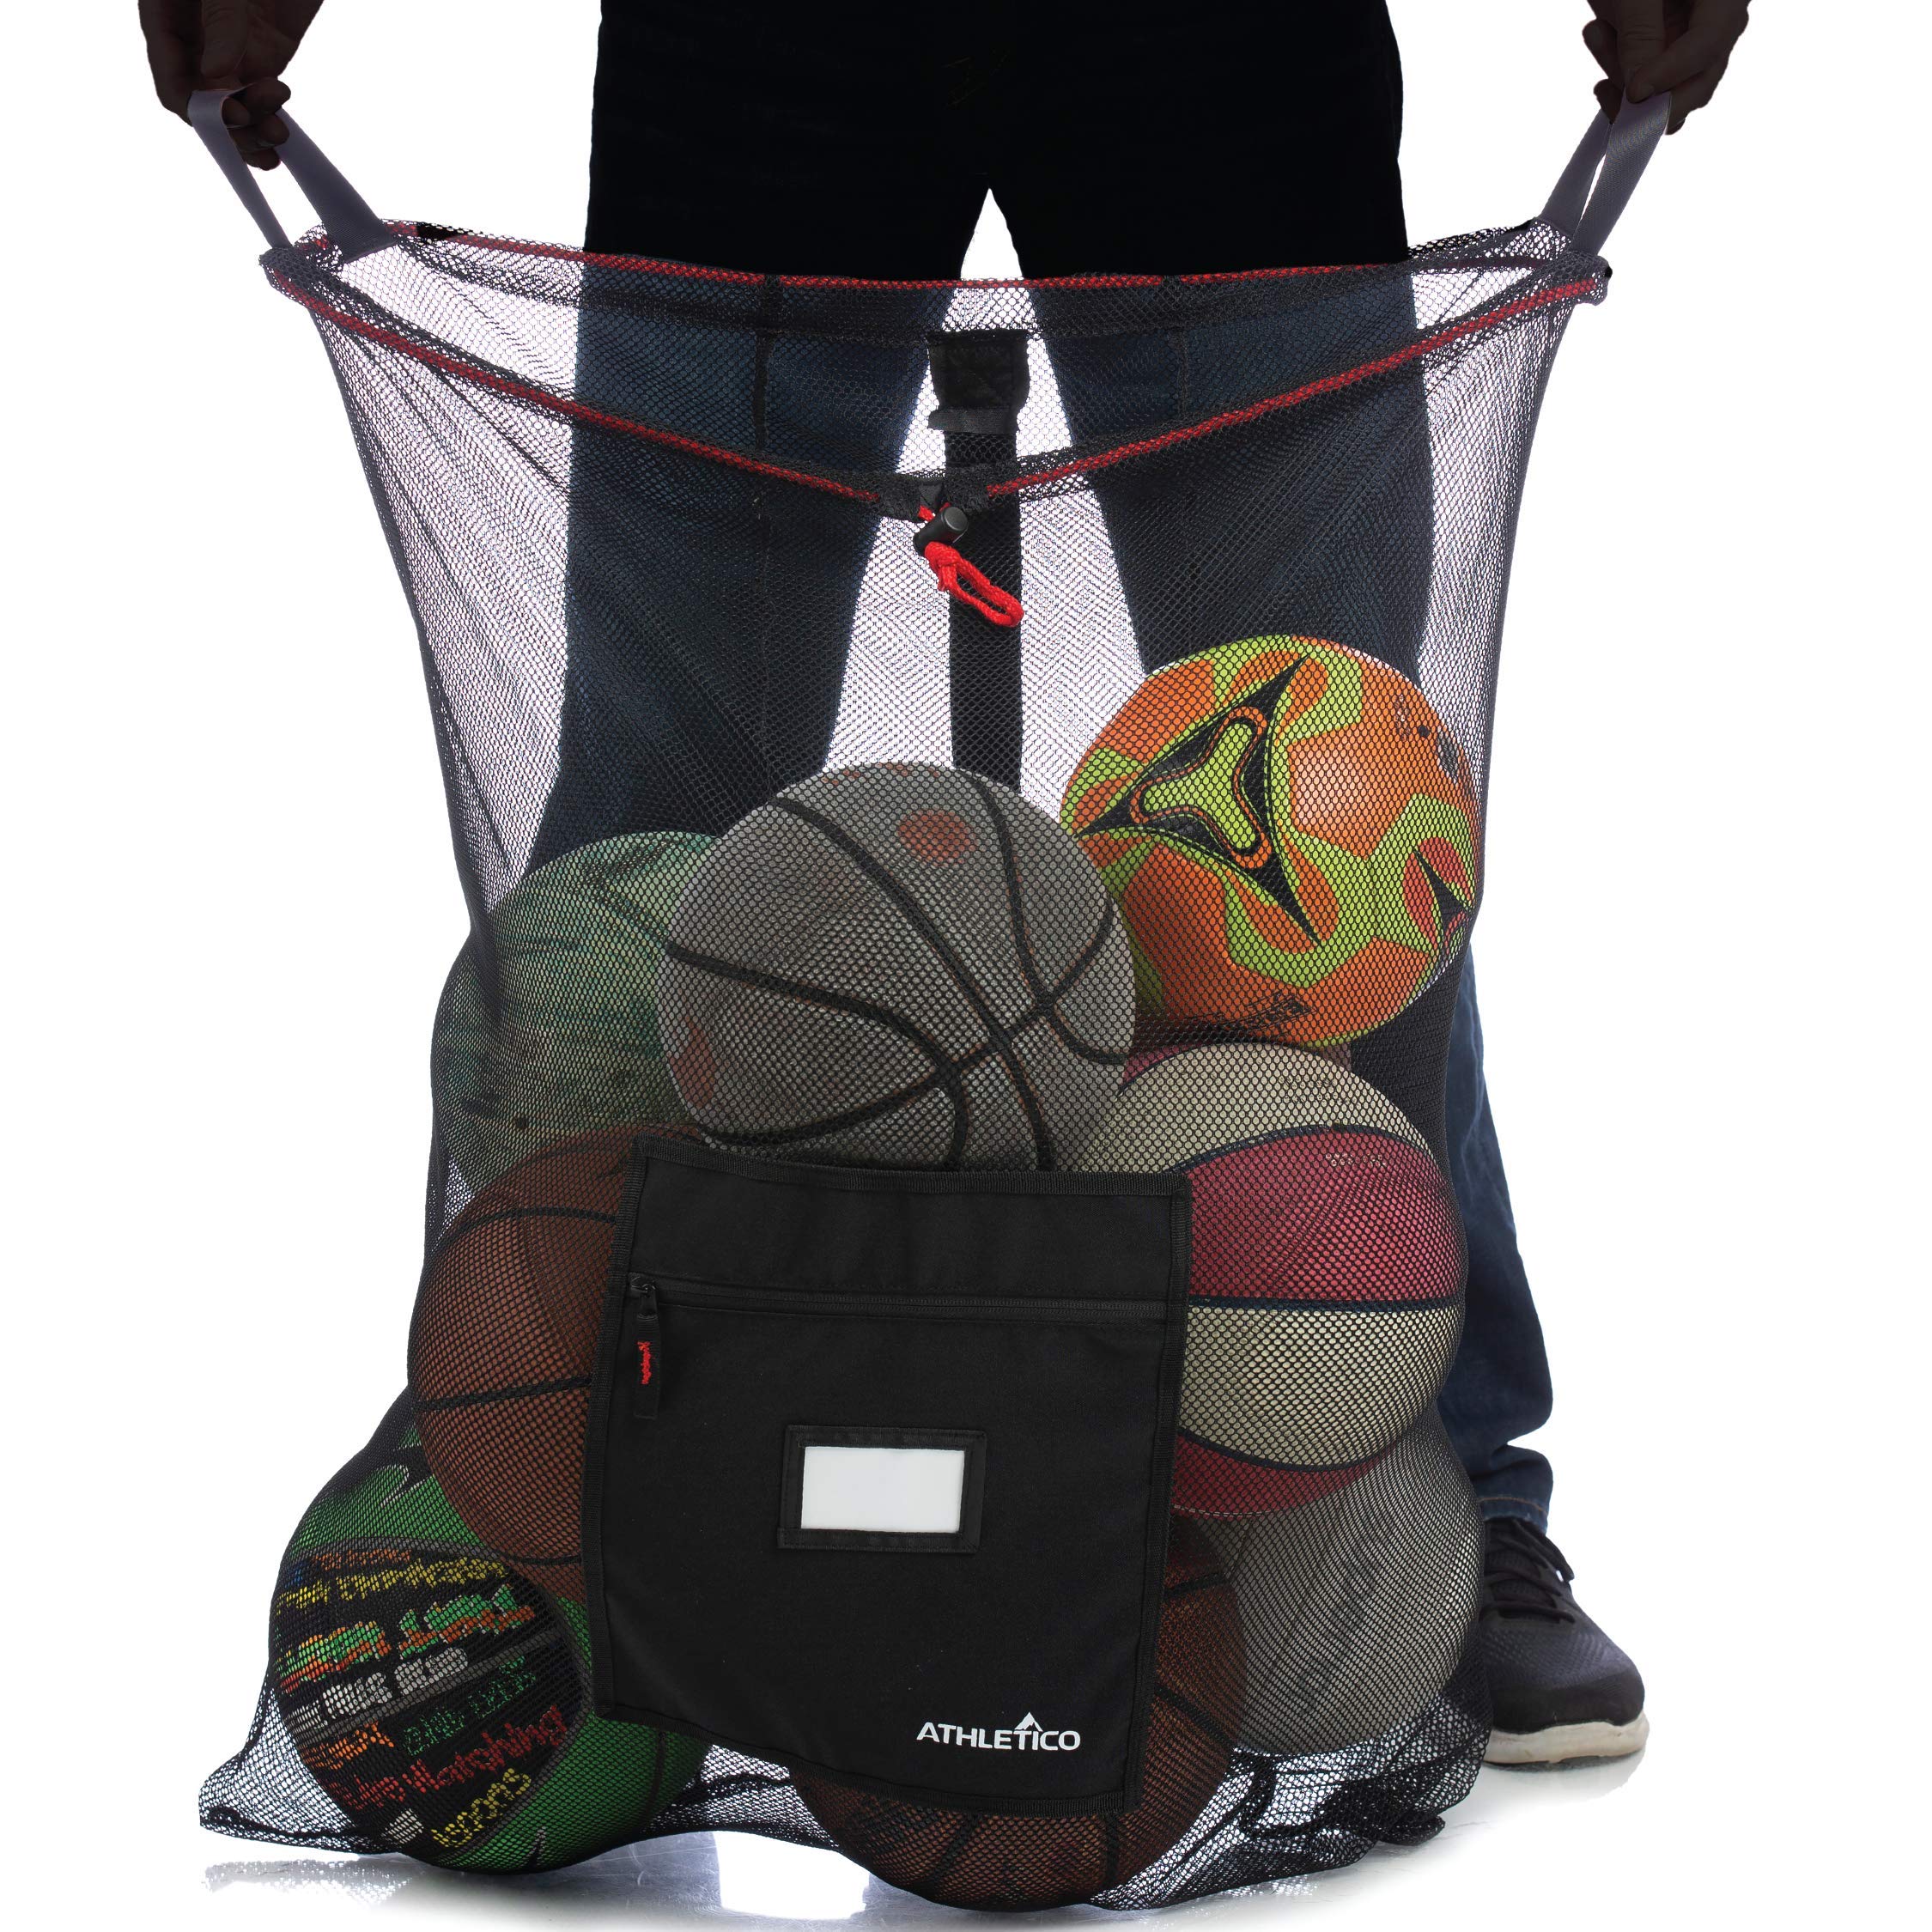 Athletico Extra Large Ball Bag - Mesh Soccer Ball Bag - Heavy Duty Drawstring Bags Hold Equipment For Sports Including Basketball, Volleyball, Baseball, Swimming Gear or The Beach